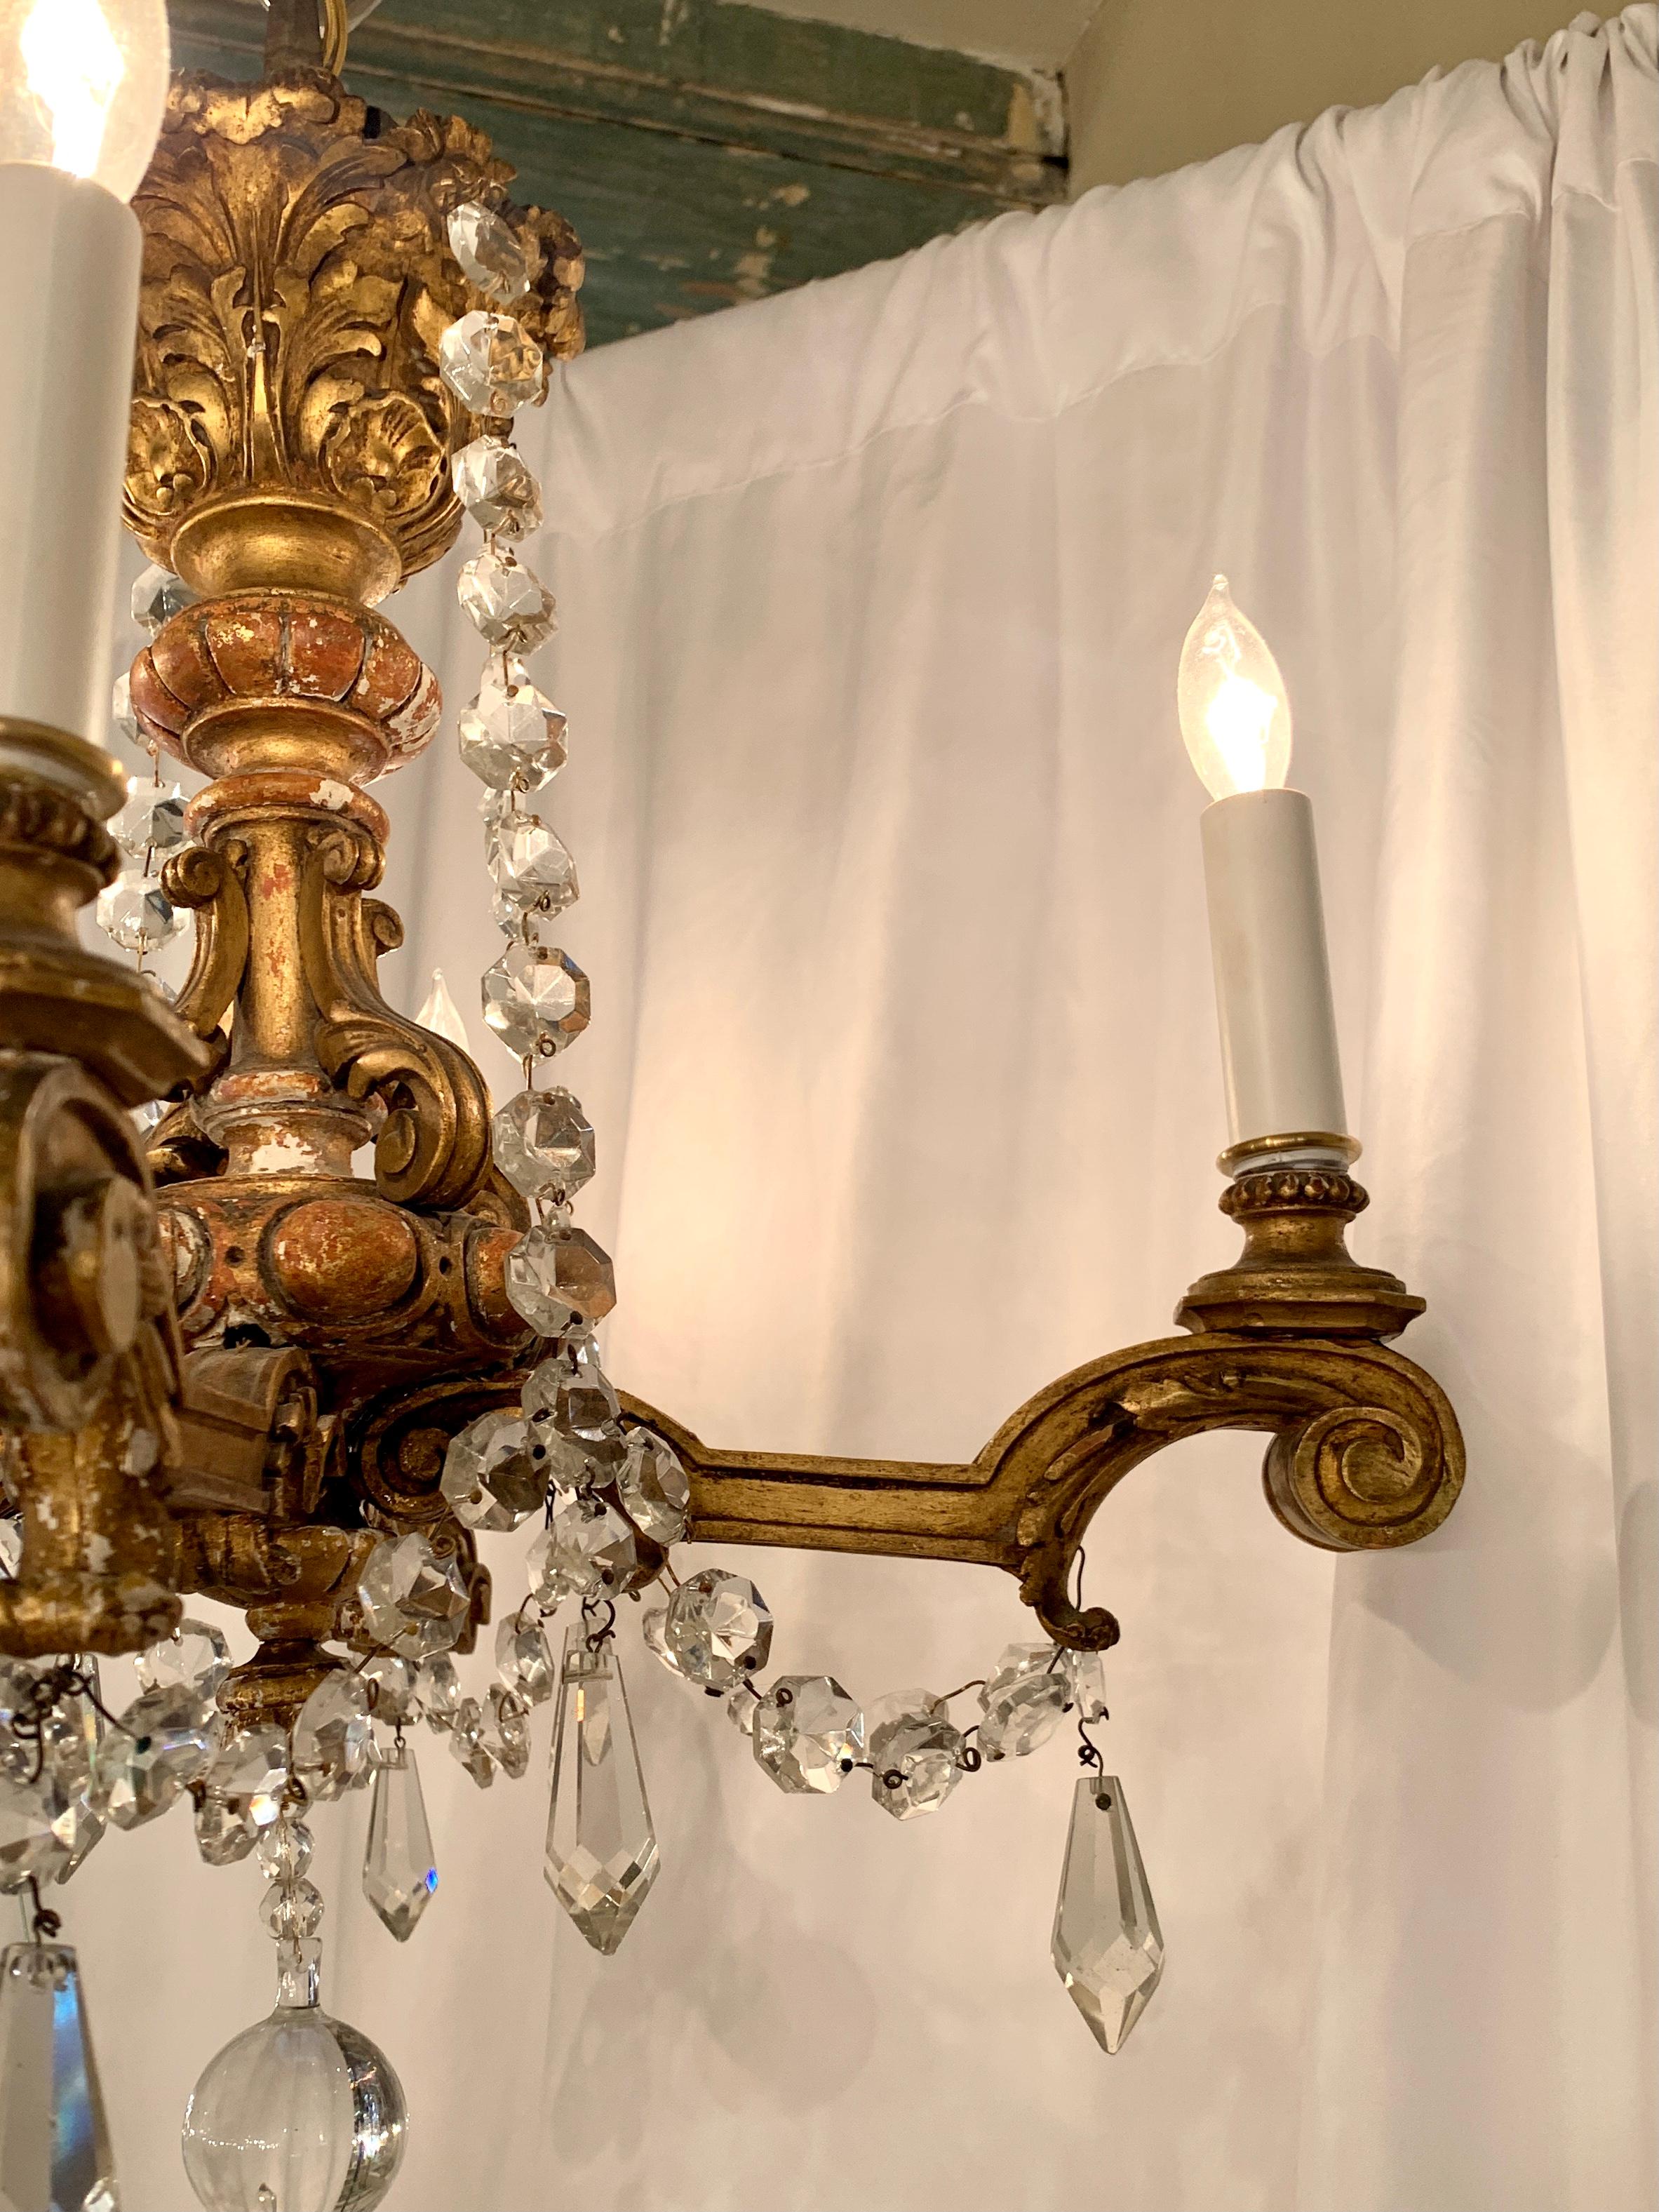 20th Century Antique Italian Carved Wood and Gesso Crystal Chandelier, Circa 1920s